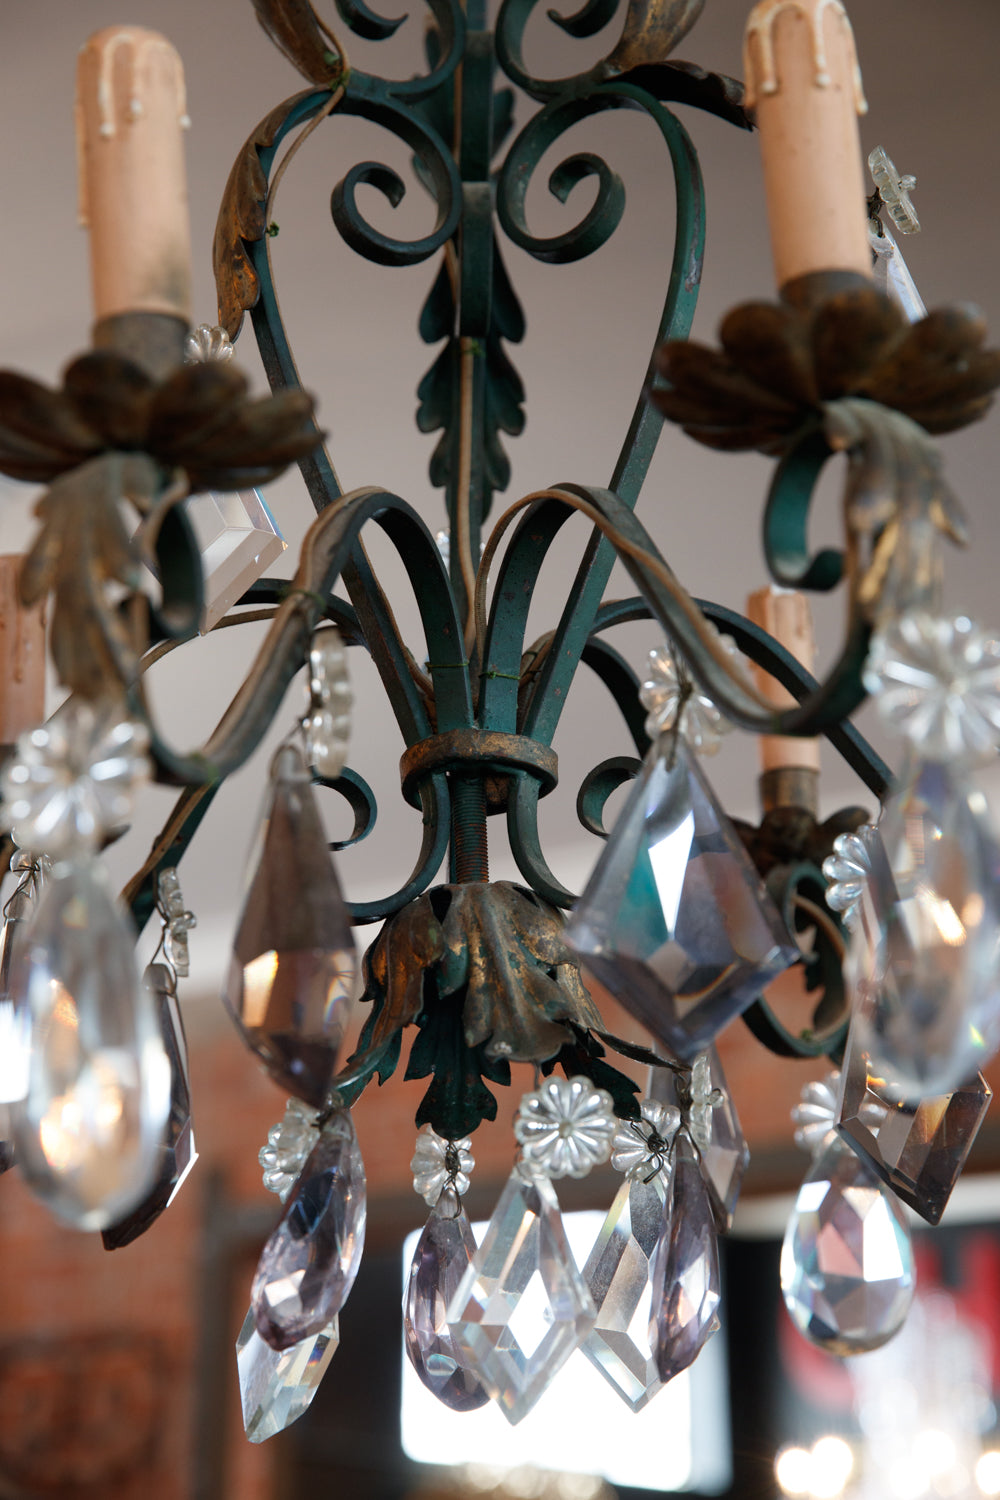 Crystal  French Chandelier